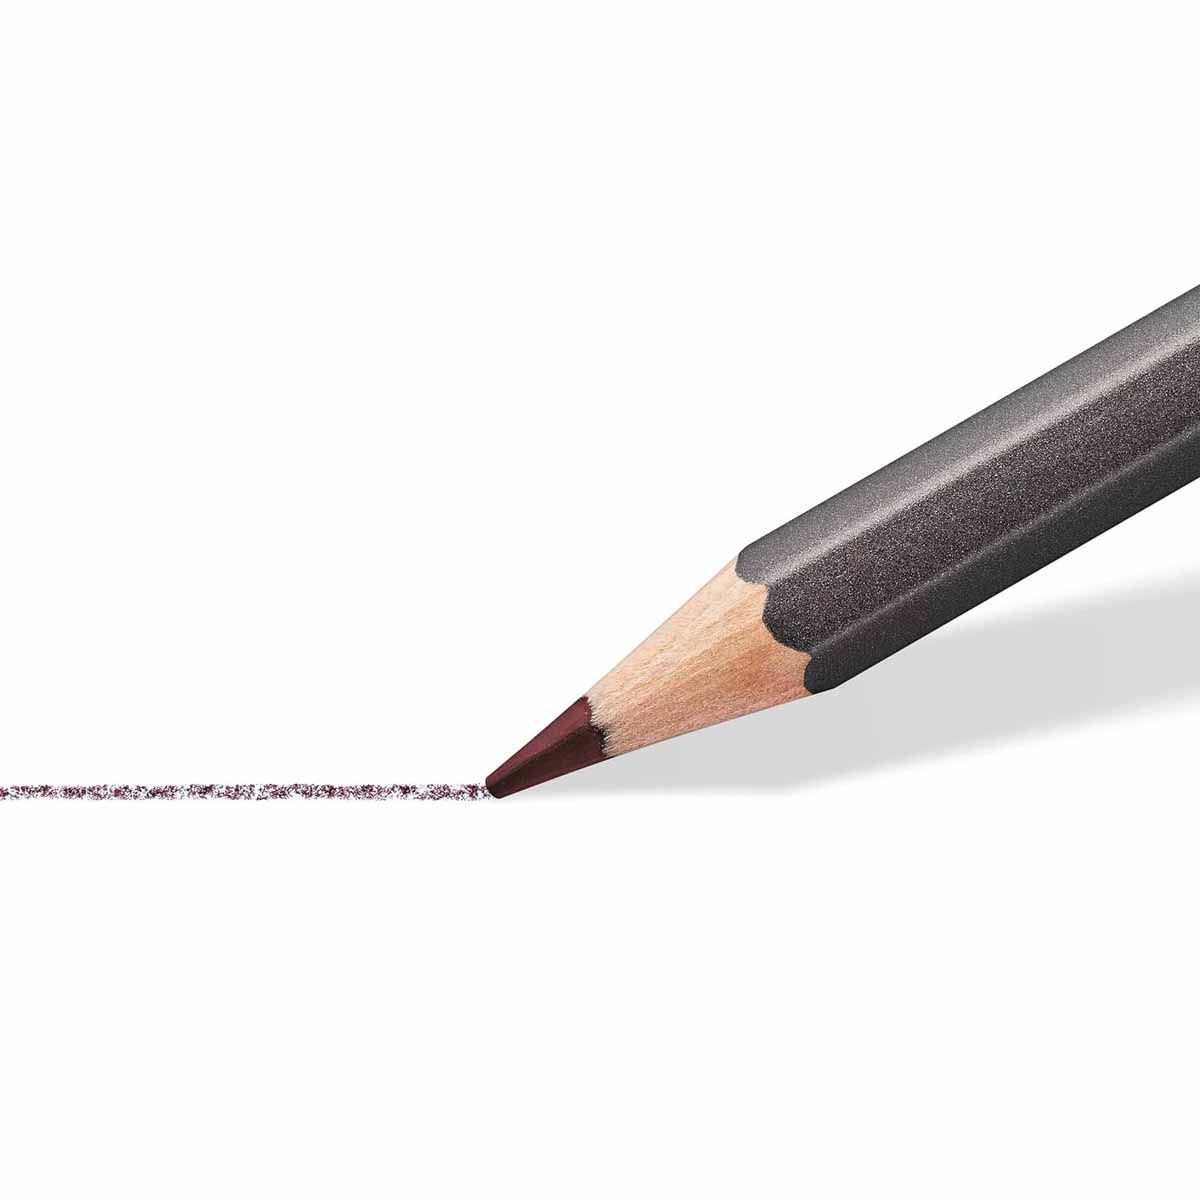 High-quality watercolor pencils are specially made for actually painting using colored graphite